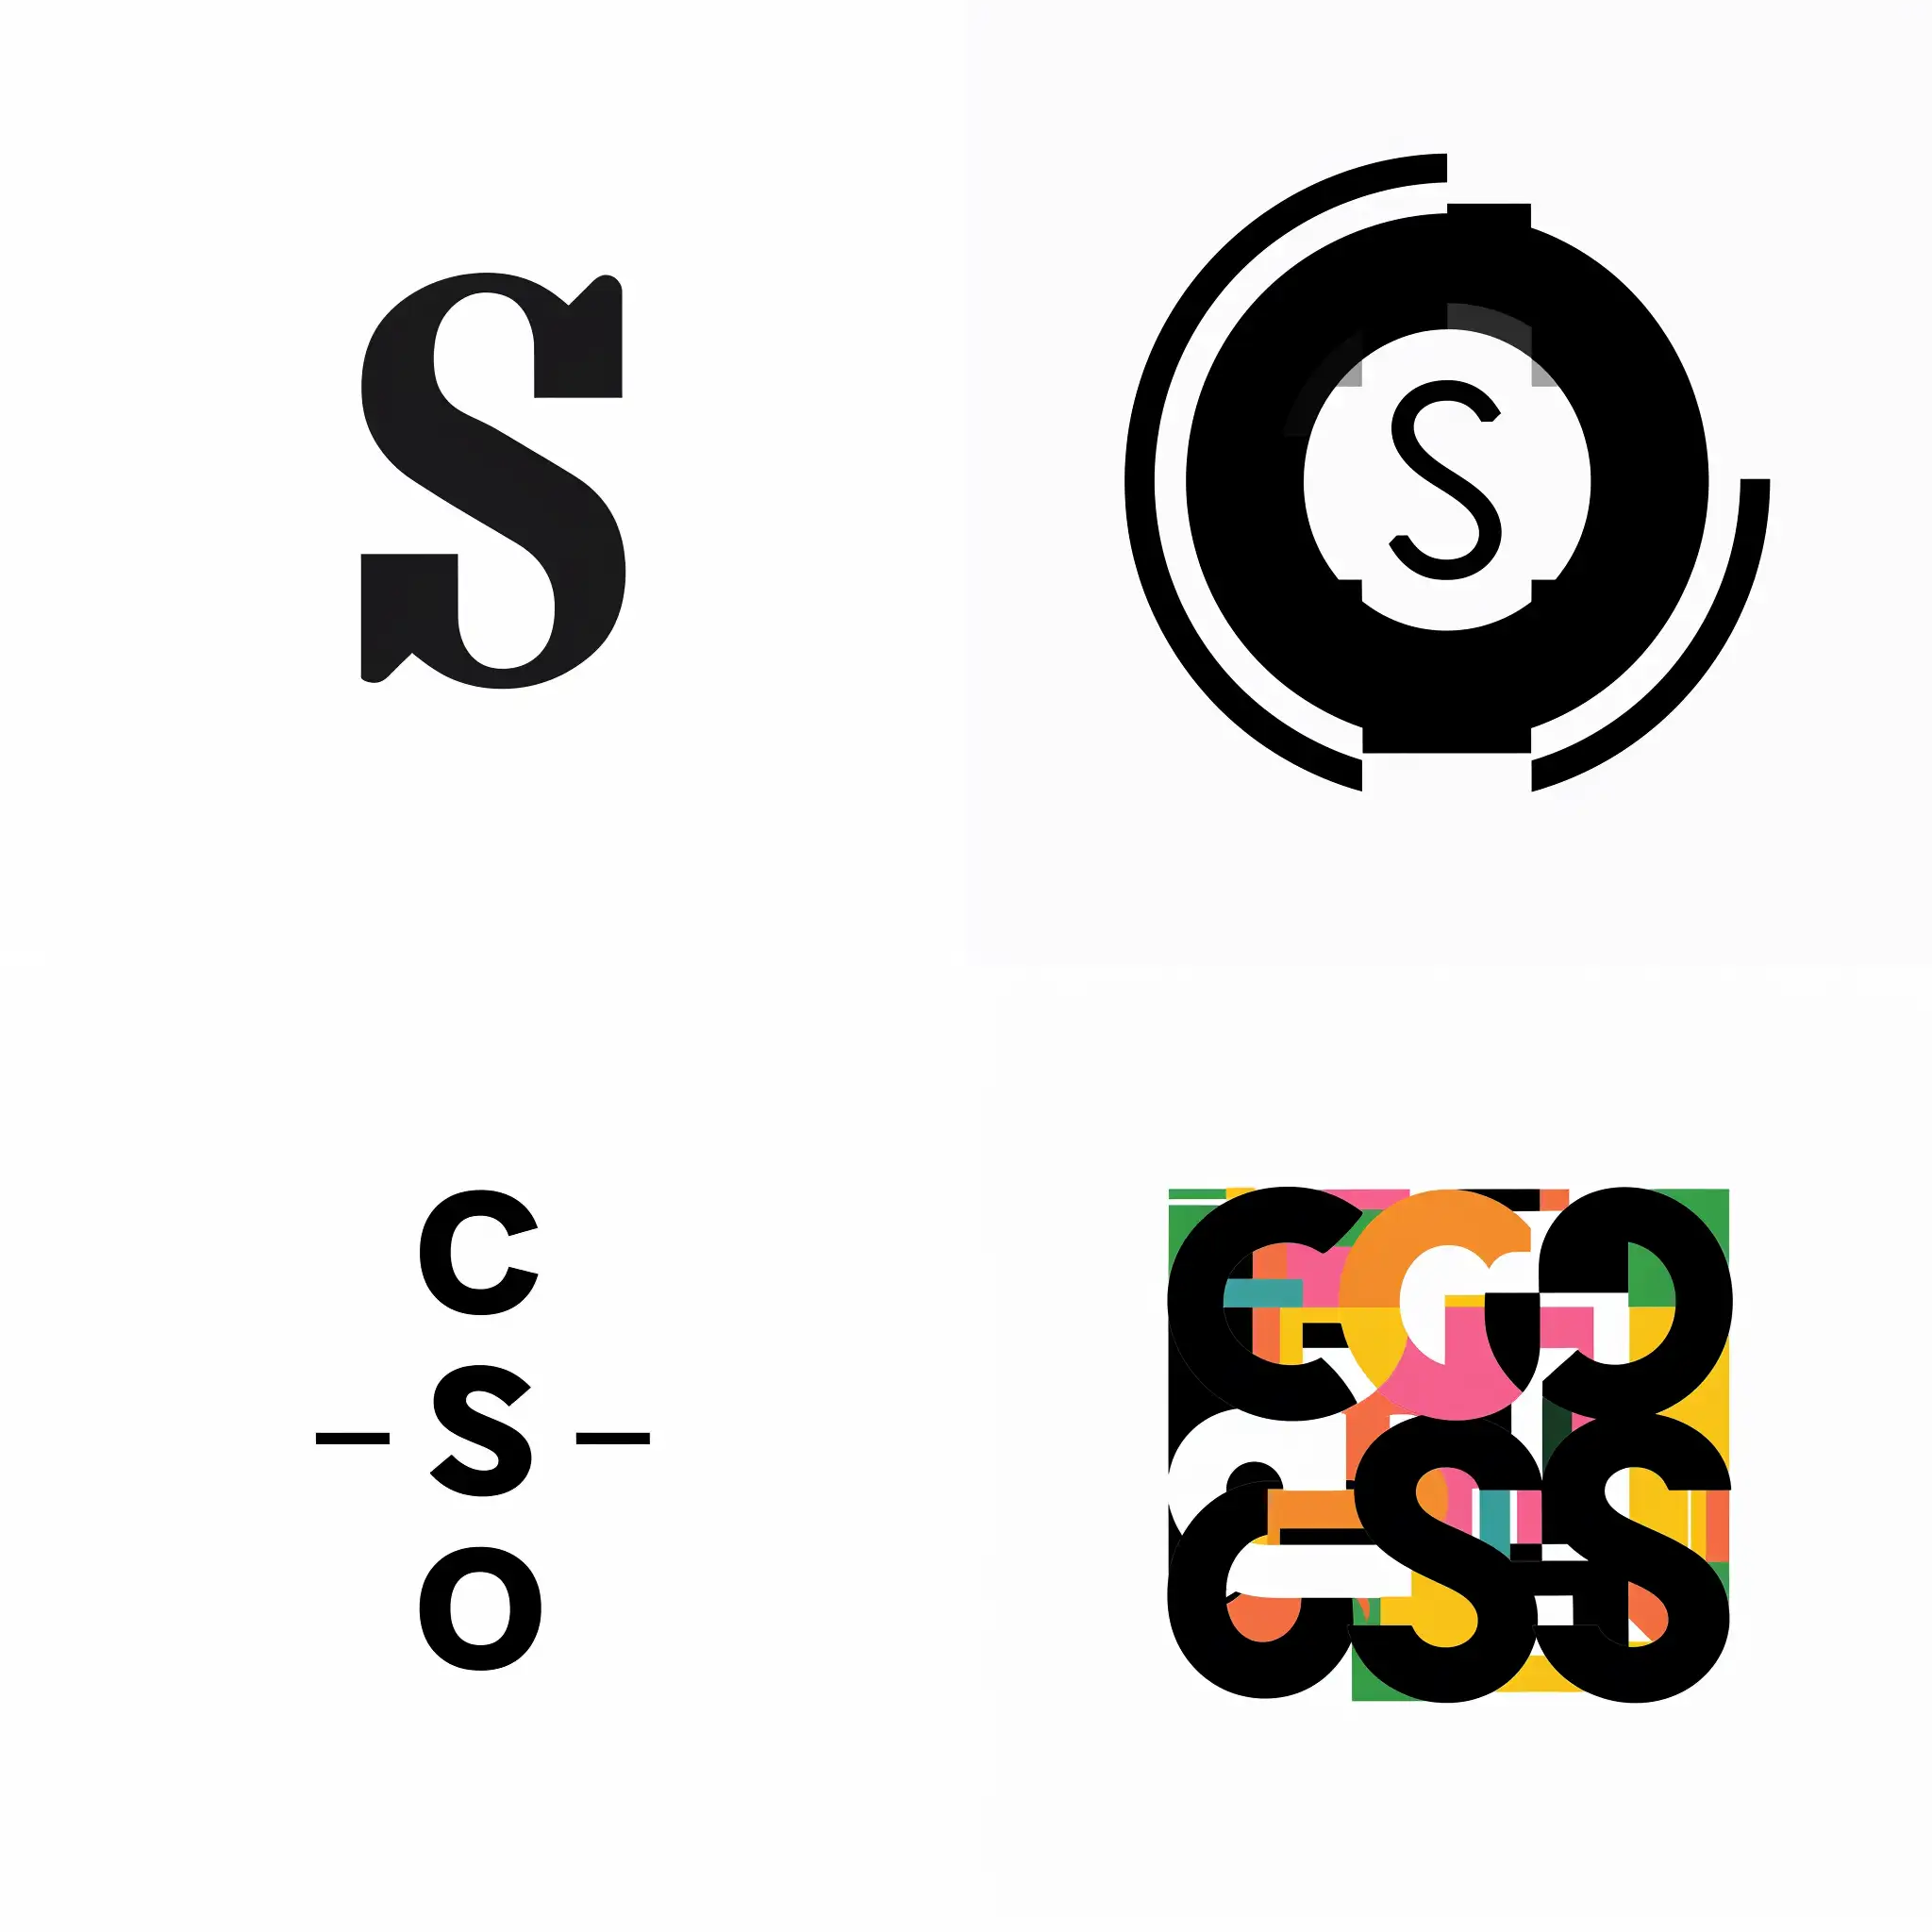 simple vector image, flat image, black image, white background, abstract image containing the letters C S S
